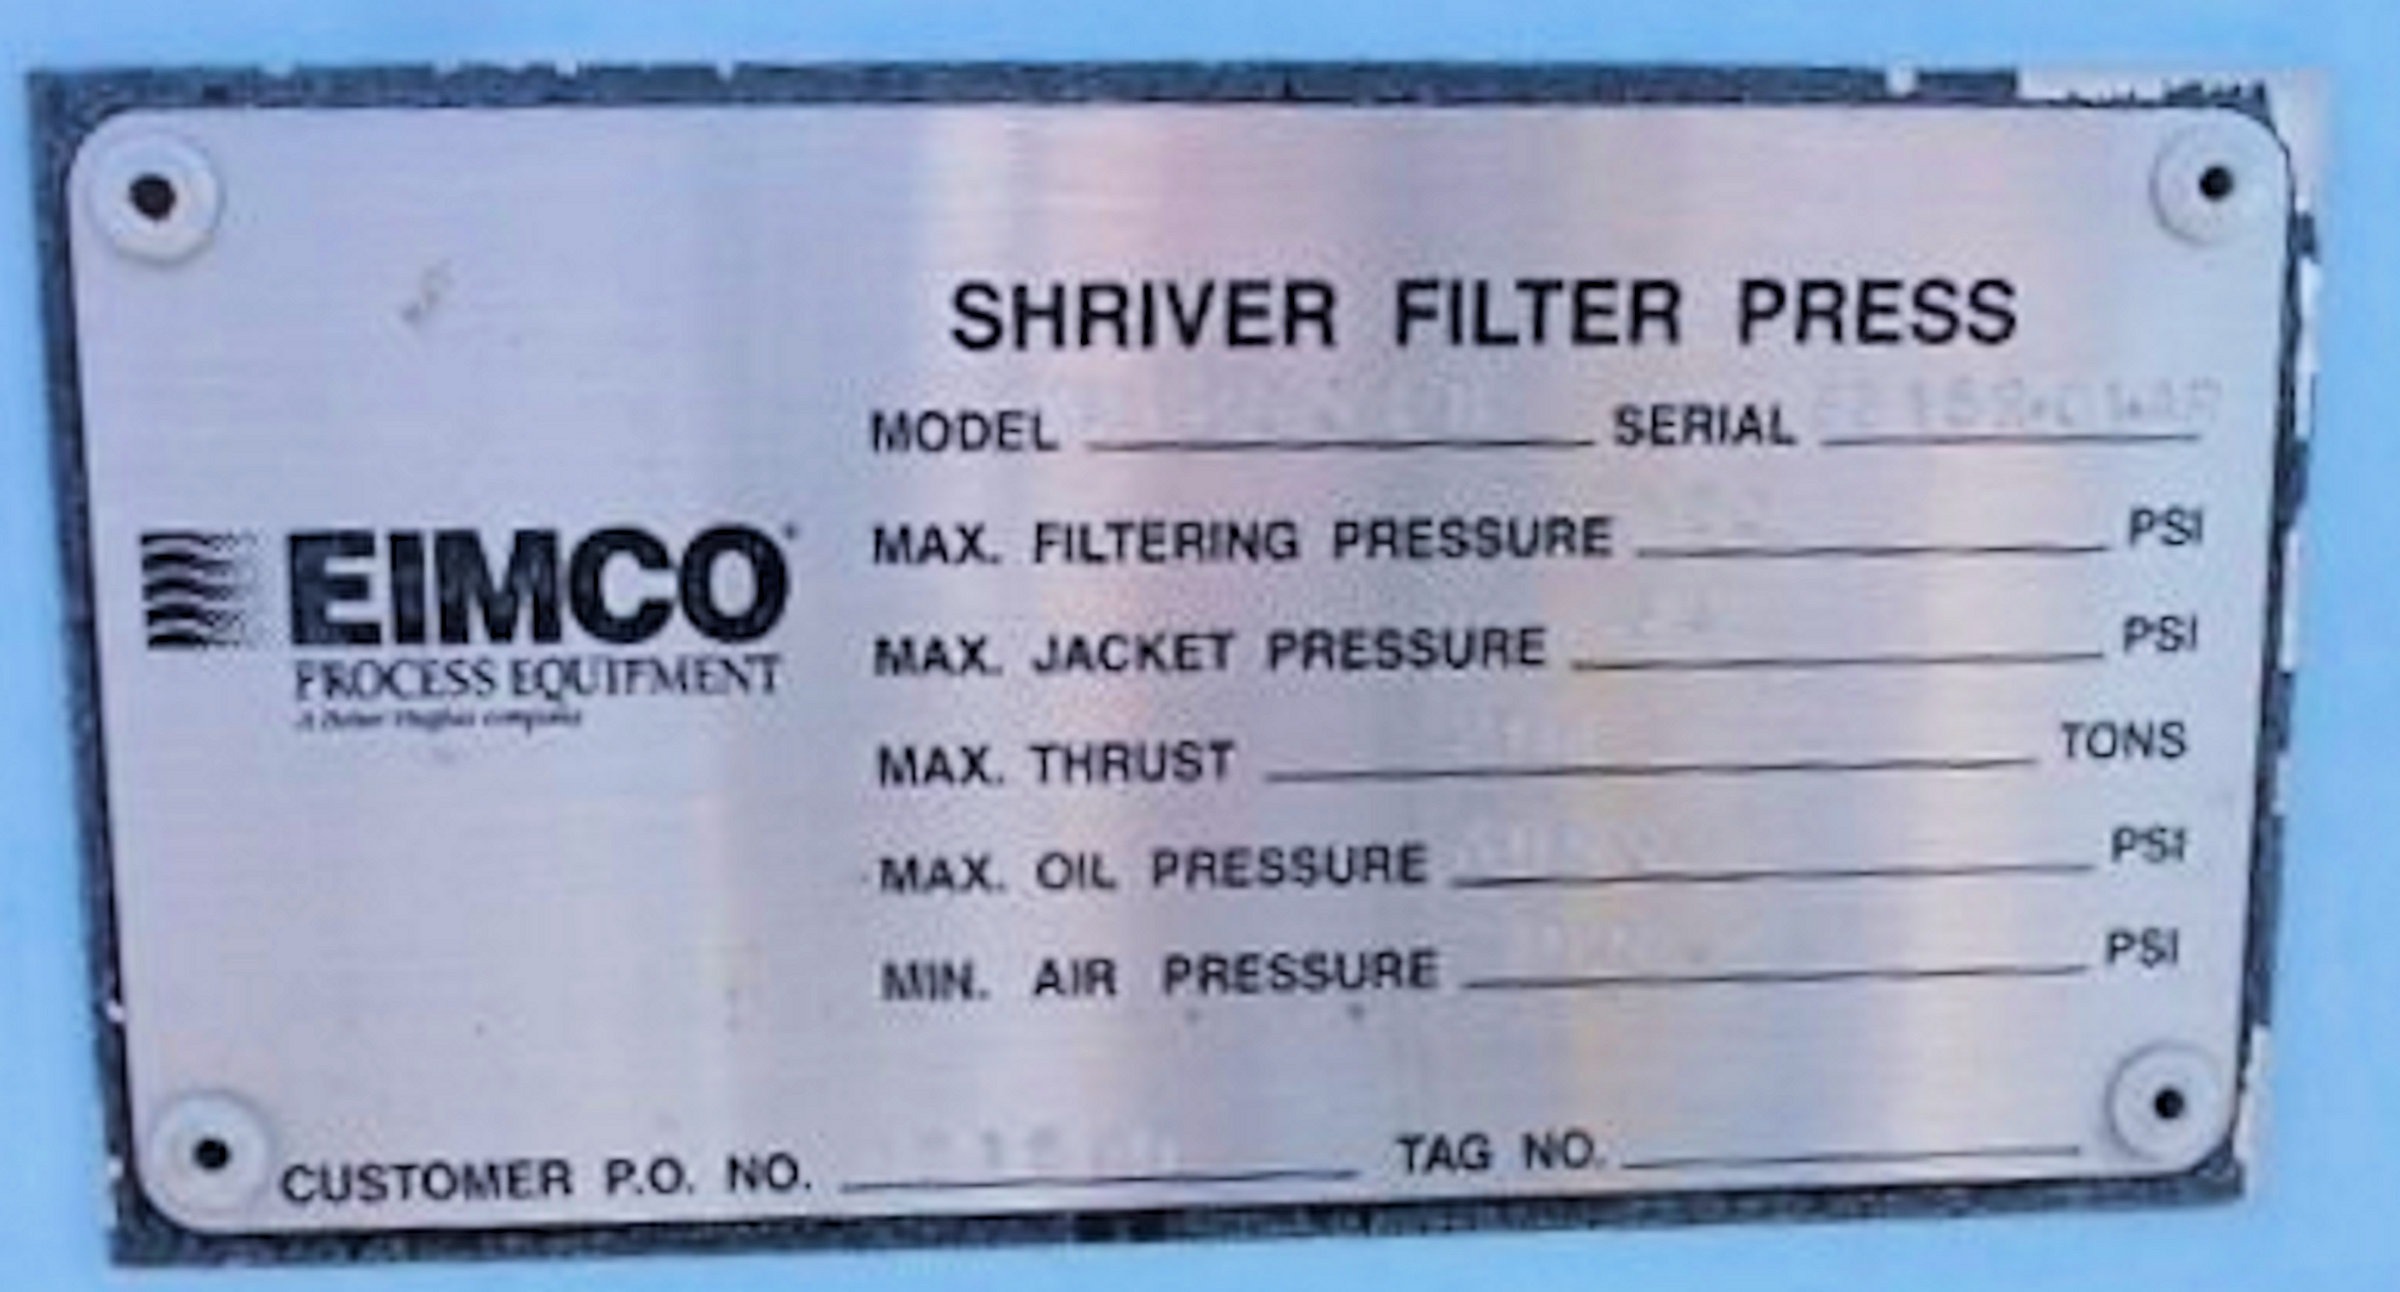 Eimco Shriver 48" X 48" Filter Press With 32 Plates)